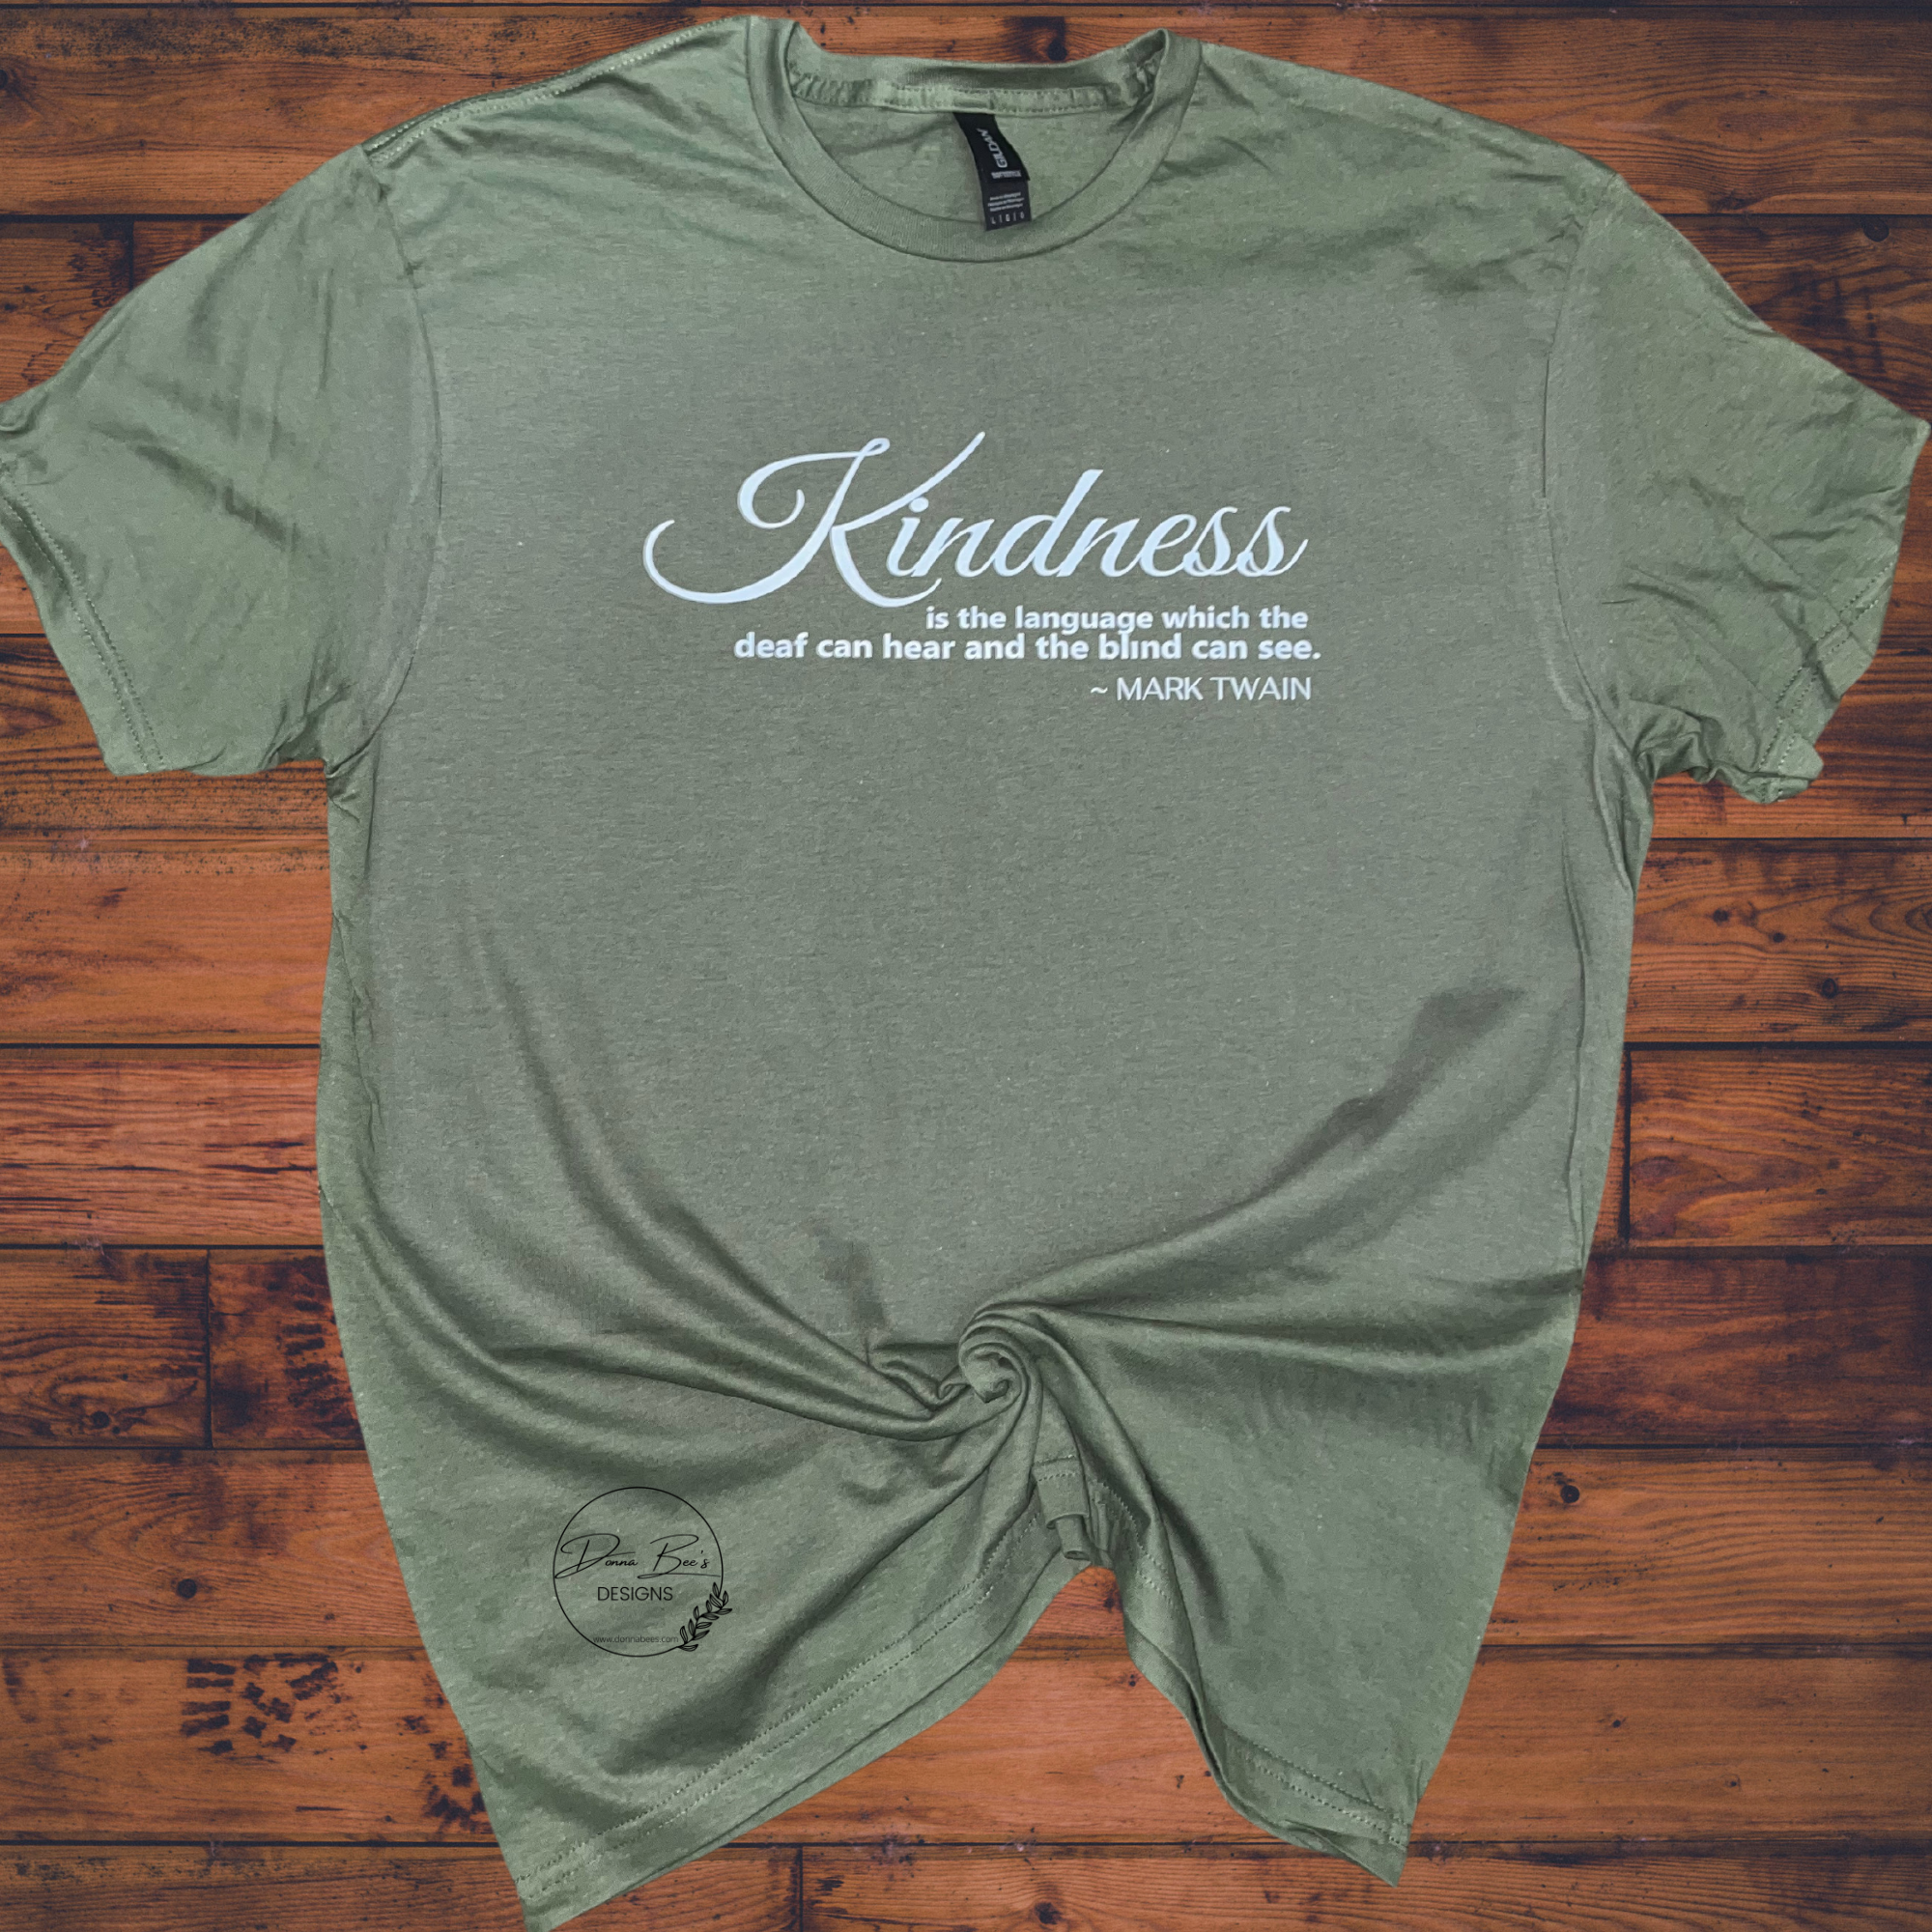 Kindness T-Shirt | the language deaf can hear and blind can see tee